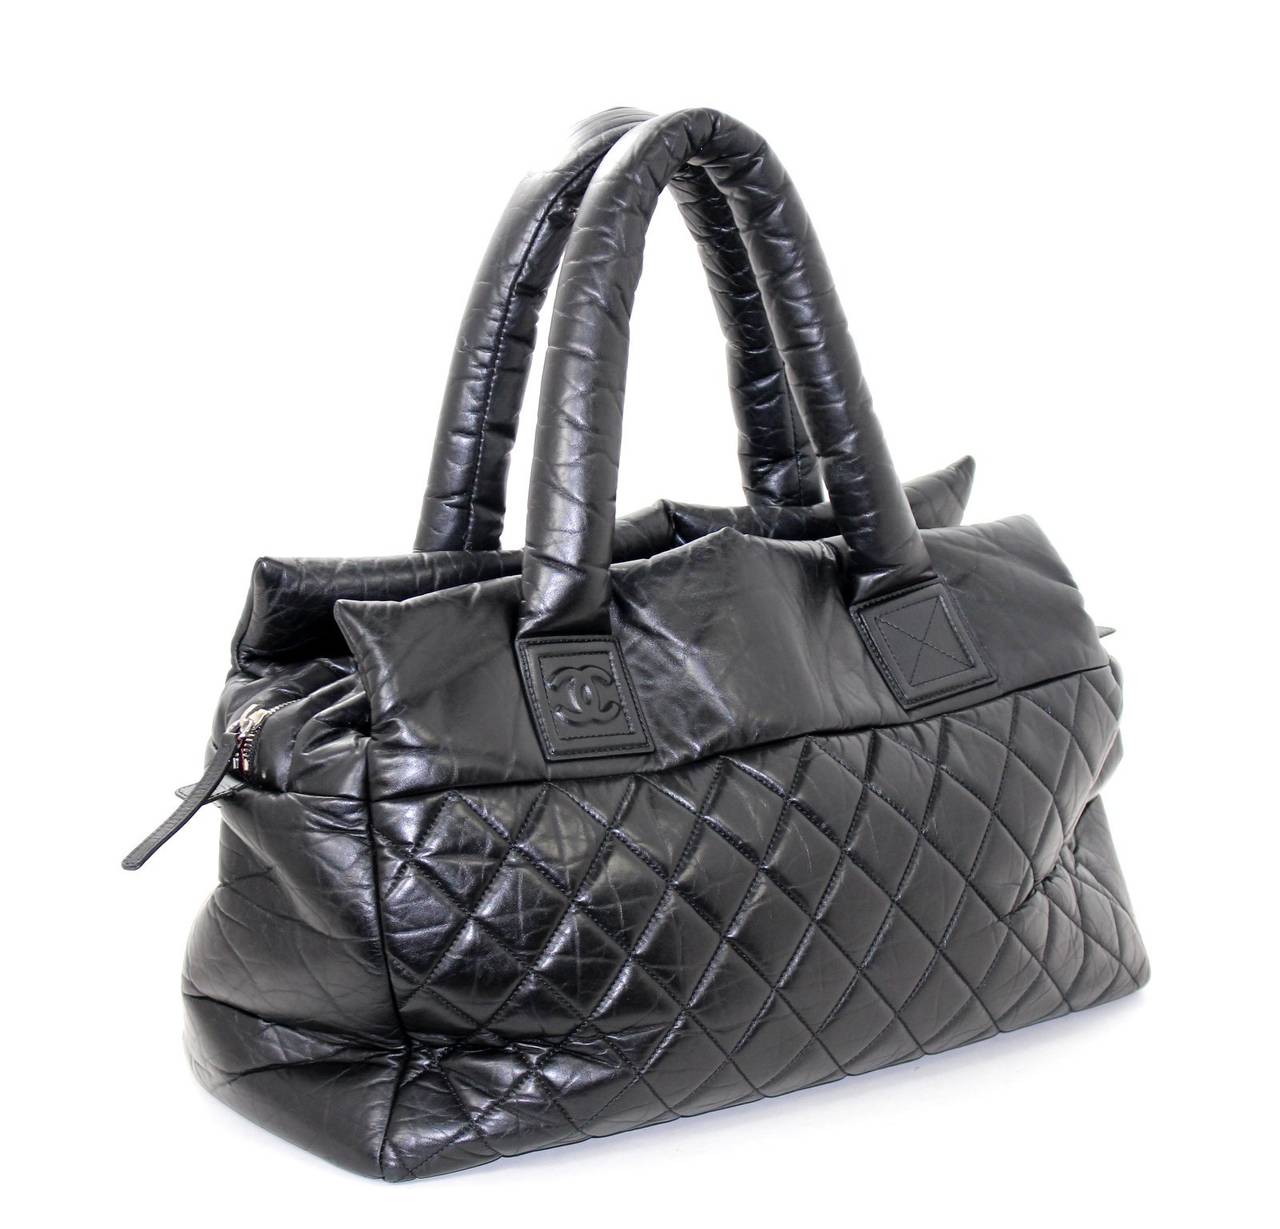 Chanel Black Lambskin Coco Cocoon XL Tote
Nearly pristine; barely ever carried. Estimated retail $3,600.00.

The Coco Cocoon Collection is sporty and chic; a relaxed departure from the structured classic pieces.  In all leather, this   XL version